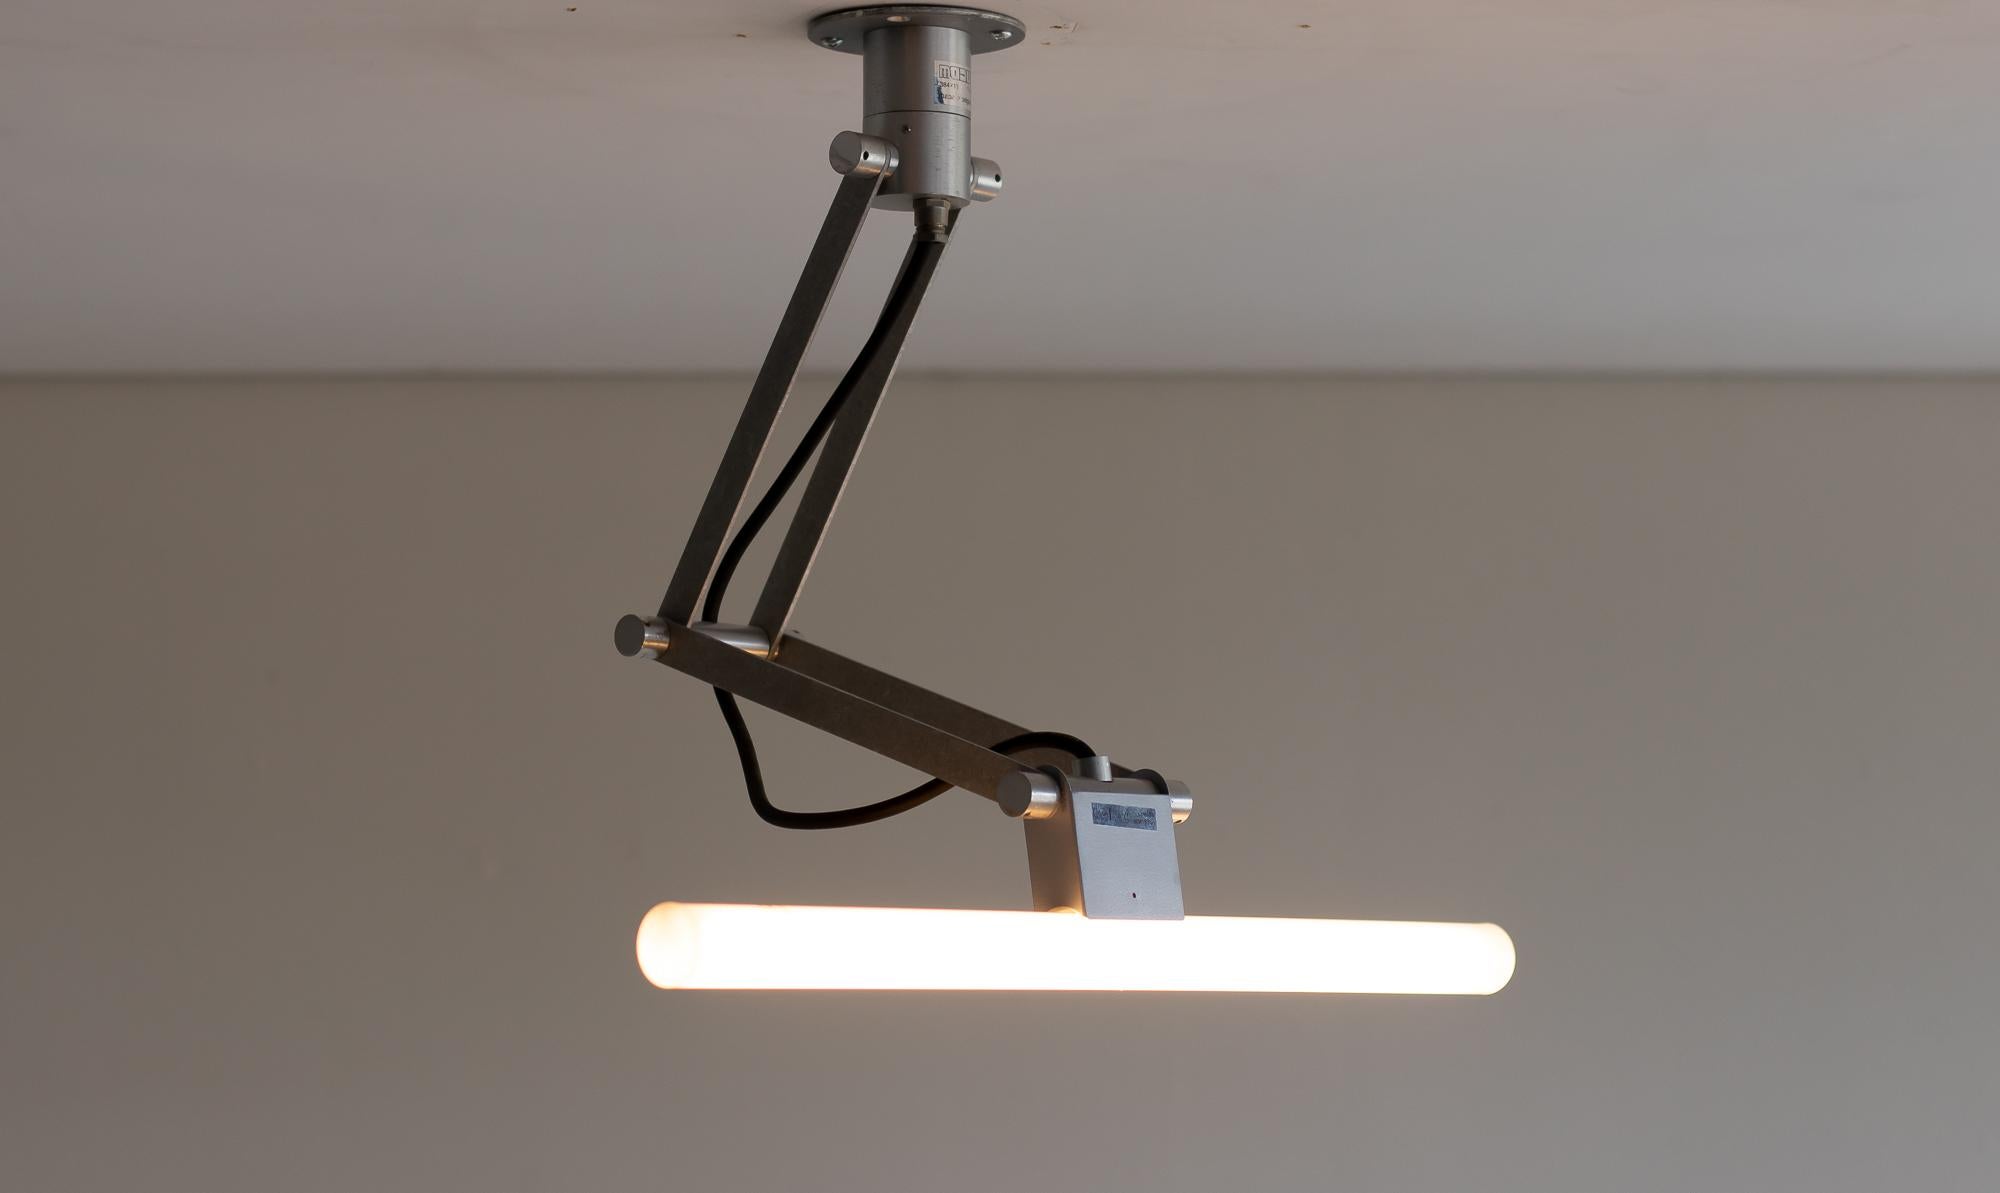 Classic Modular industrial light, adjustable in various positions. 
Suitable for a LED light source.
Marked with label.
Two available, priced individually. 
 